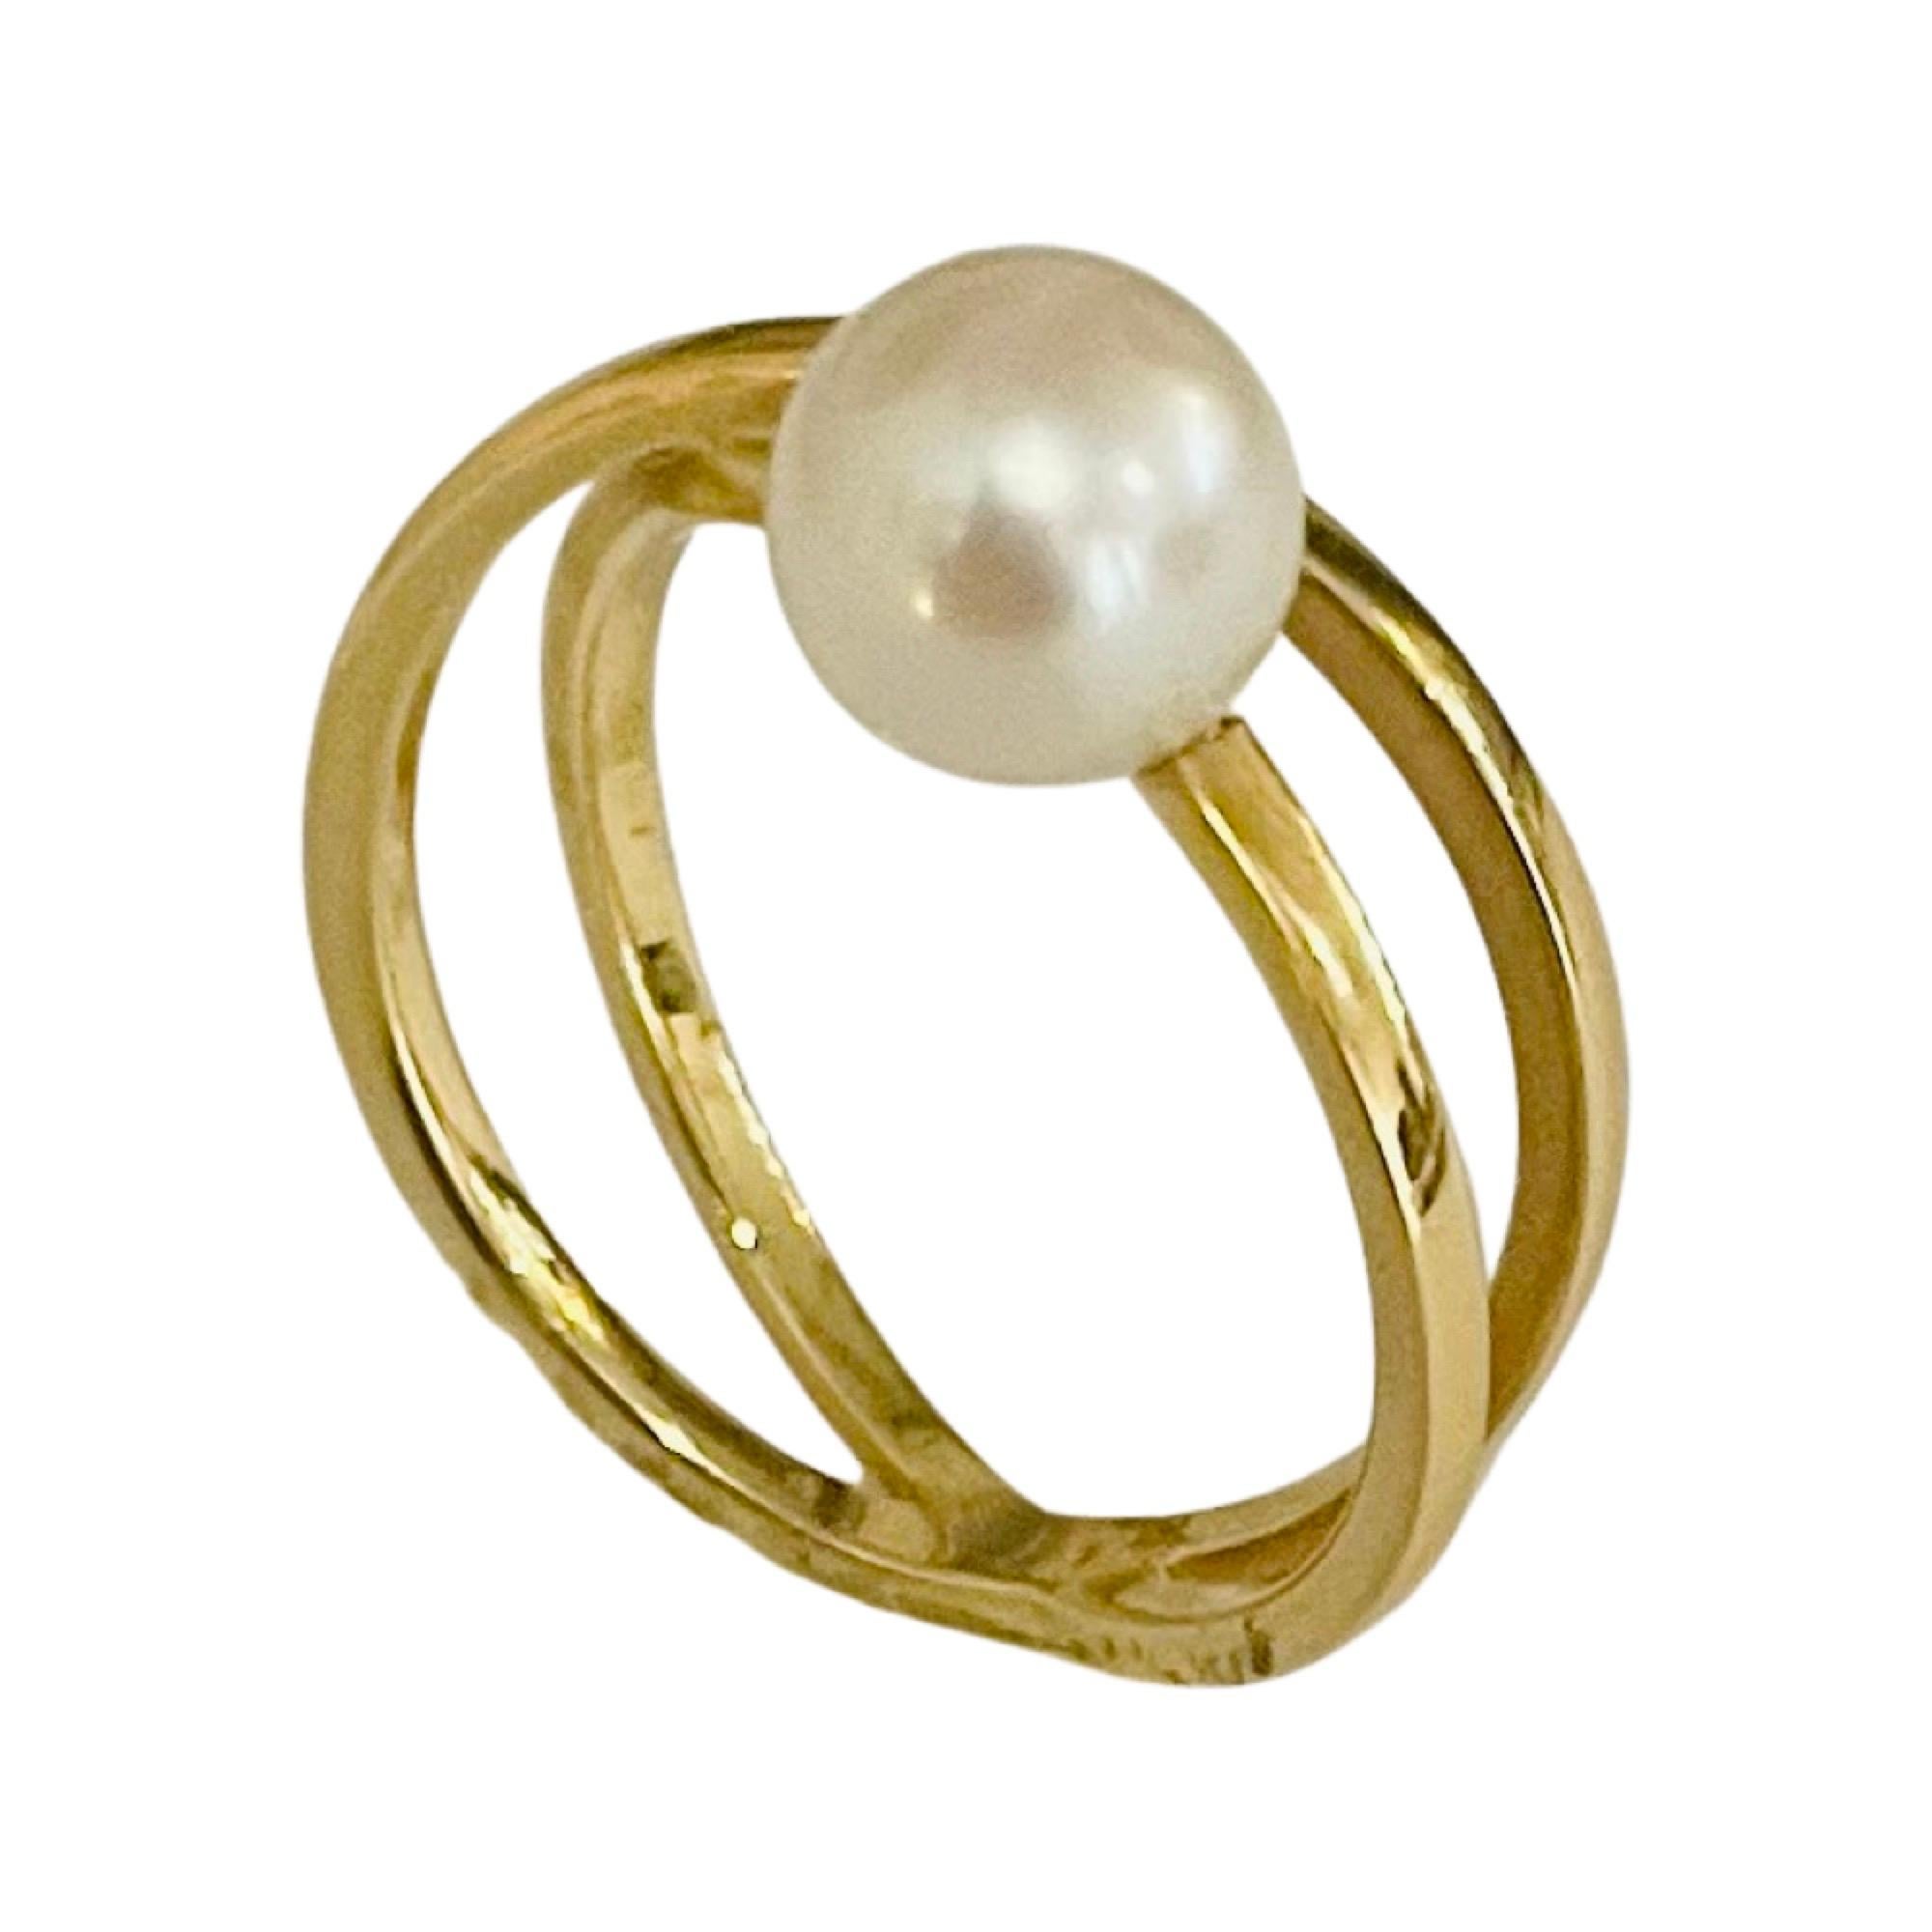 18K Yellow Gold Cultured Natural Japanese Akoya Pearl ring. This is a Gellner ring. The Pearl is 7.5mm. The pearl is round with high luster and a rose overtone.  It is 7.0 mm at the top of the shank and tapers to 2.7 mm at the base. The ring size is